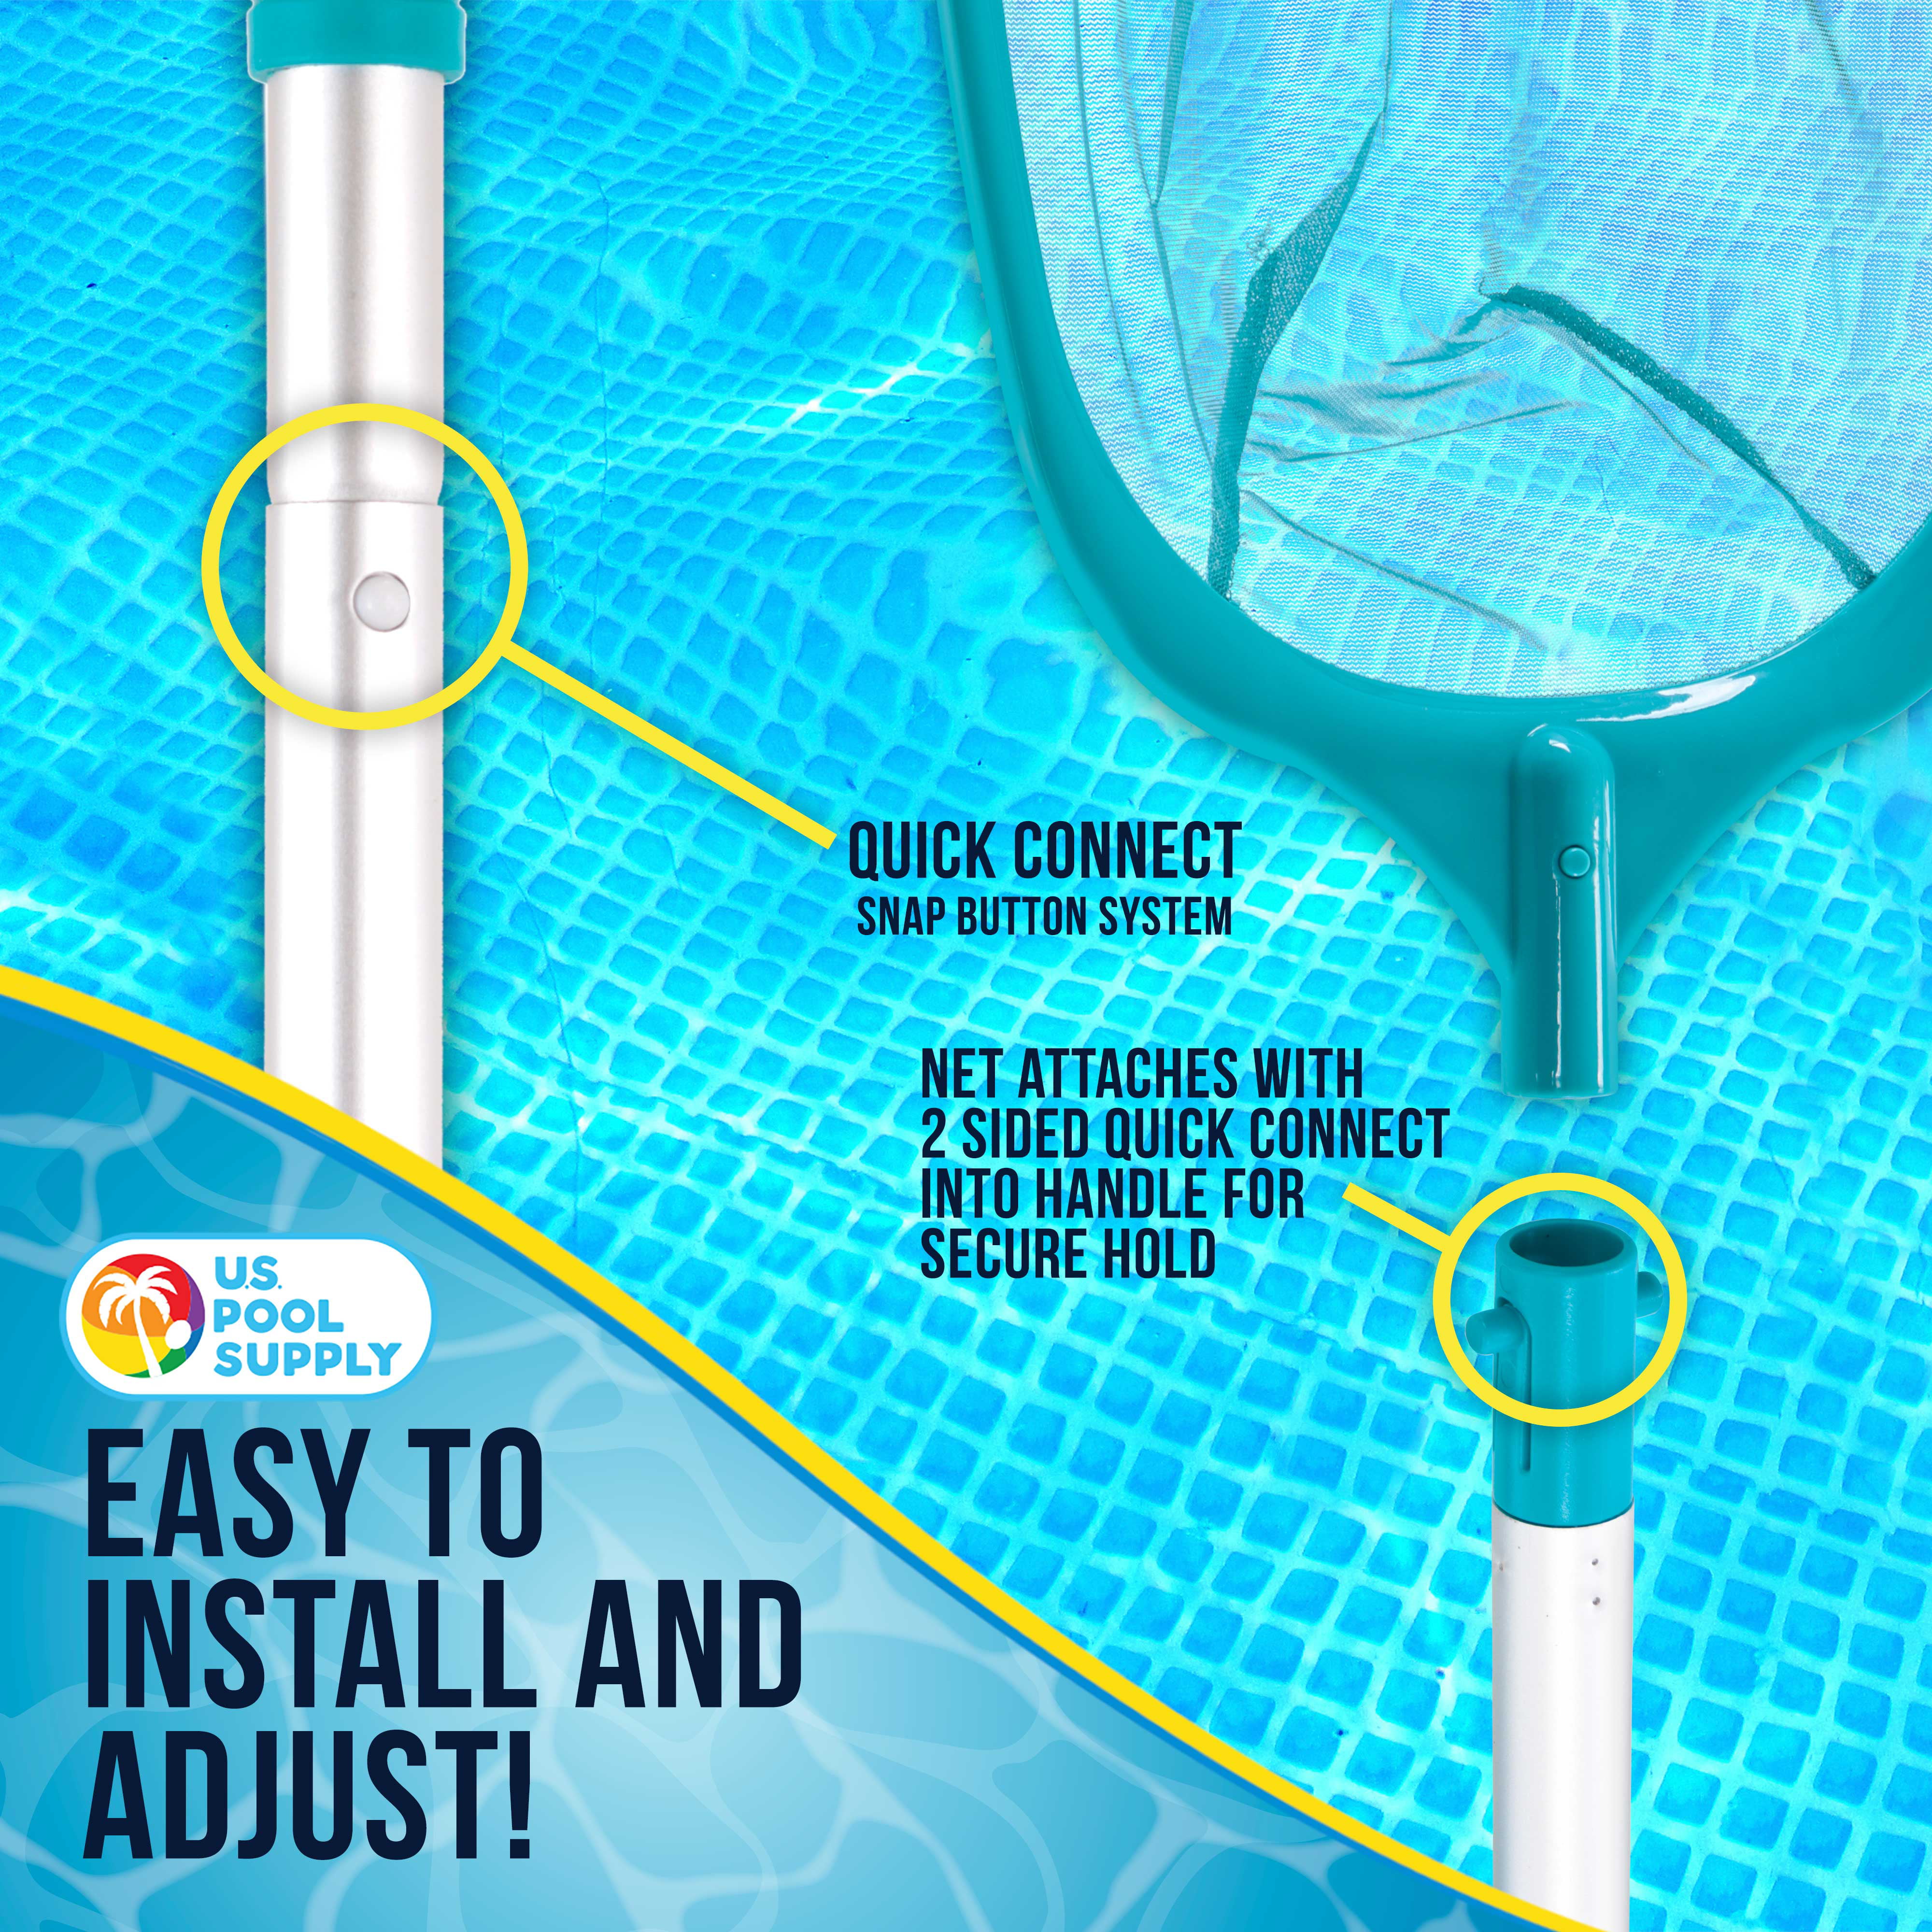 Professional Pool Skimmer with 5 Connecting Aluminum Pole Sections Swimming Pool Leaf Net for Cleaning Pool Rake Pool Cleaning Supplies Cihely Fine Mesh Pool Net 